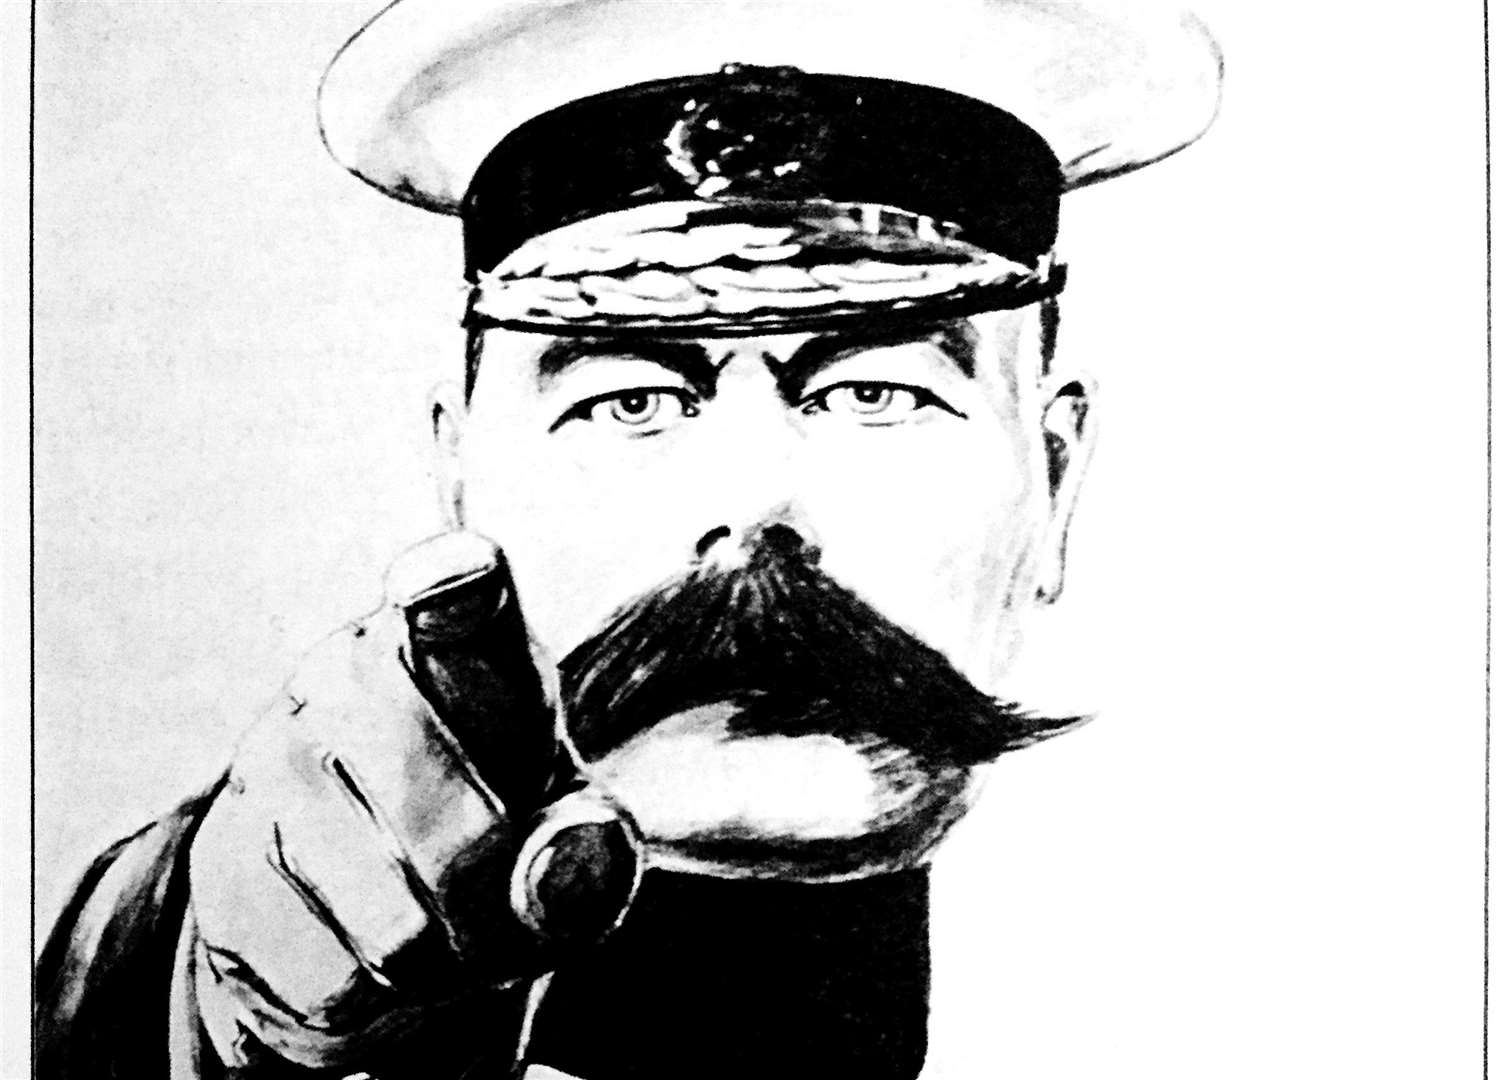 War hero Lord Kitchener faced criticism in the pages of the Daily Mail during the First World War